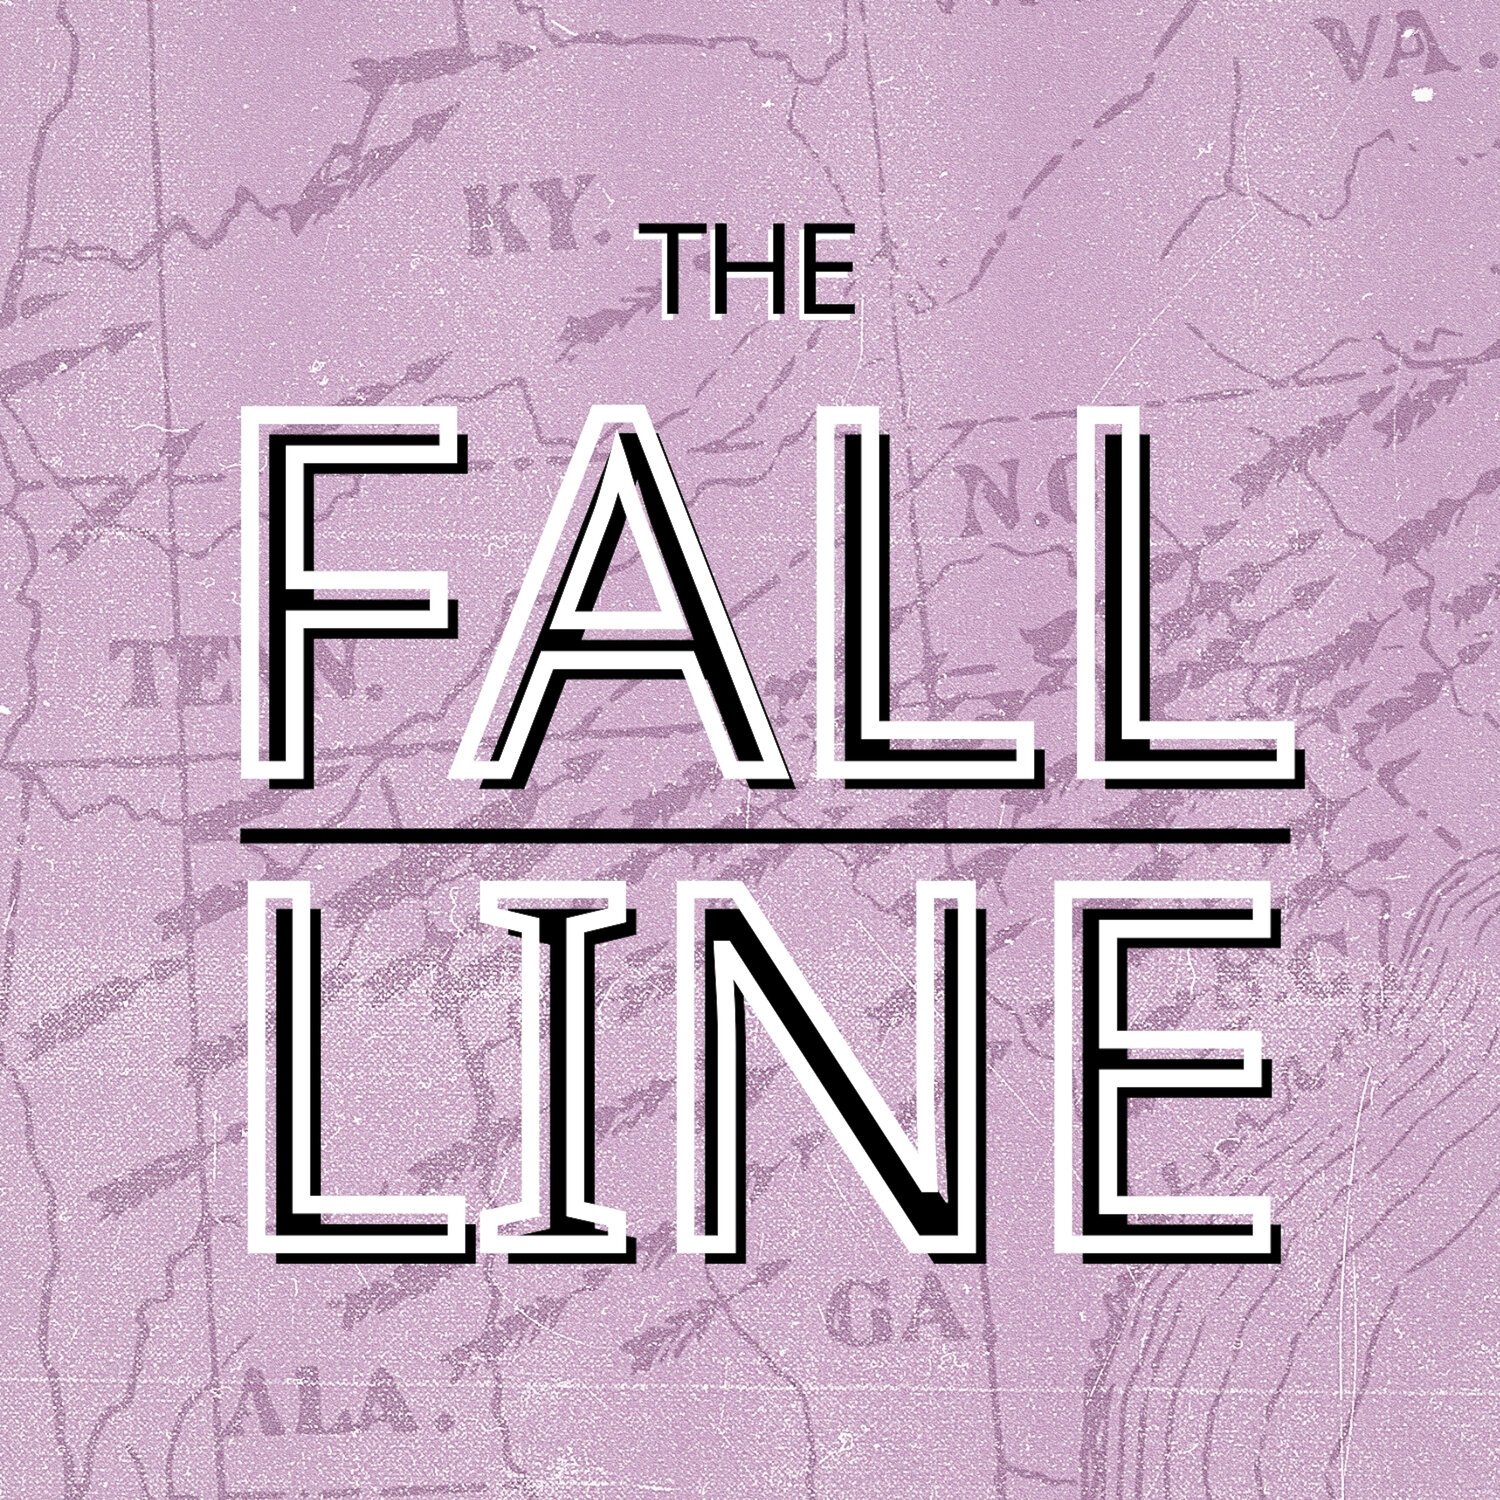 Advertise on “The Fall Line Podcast”